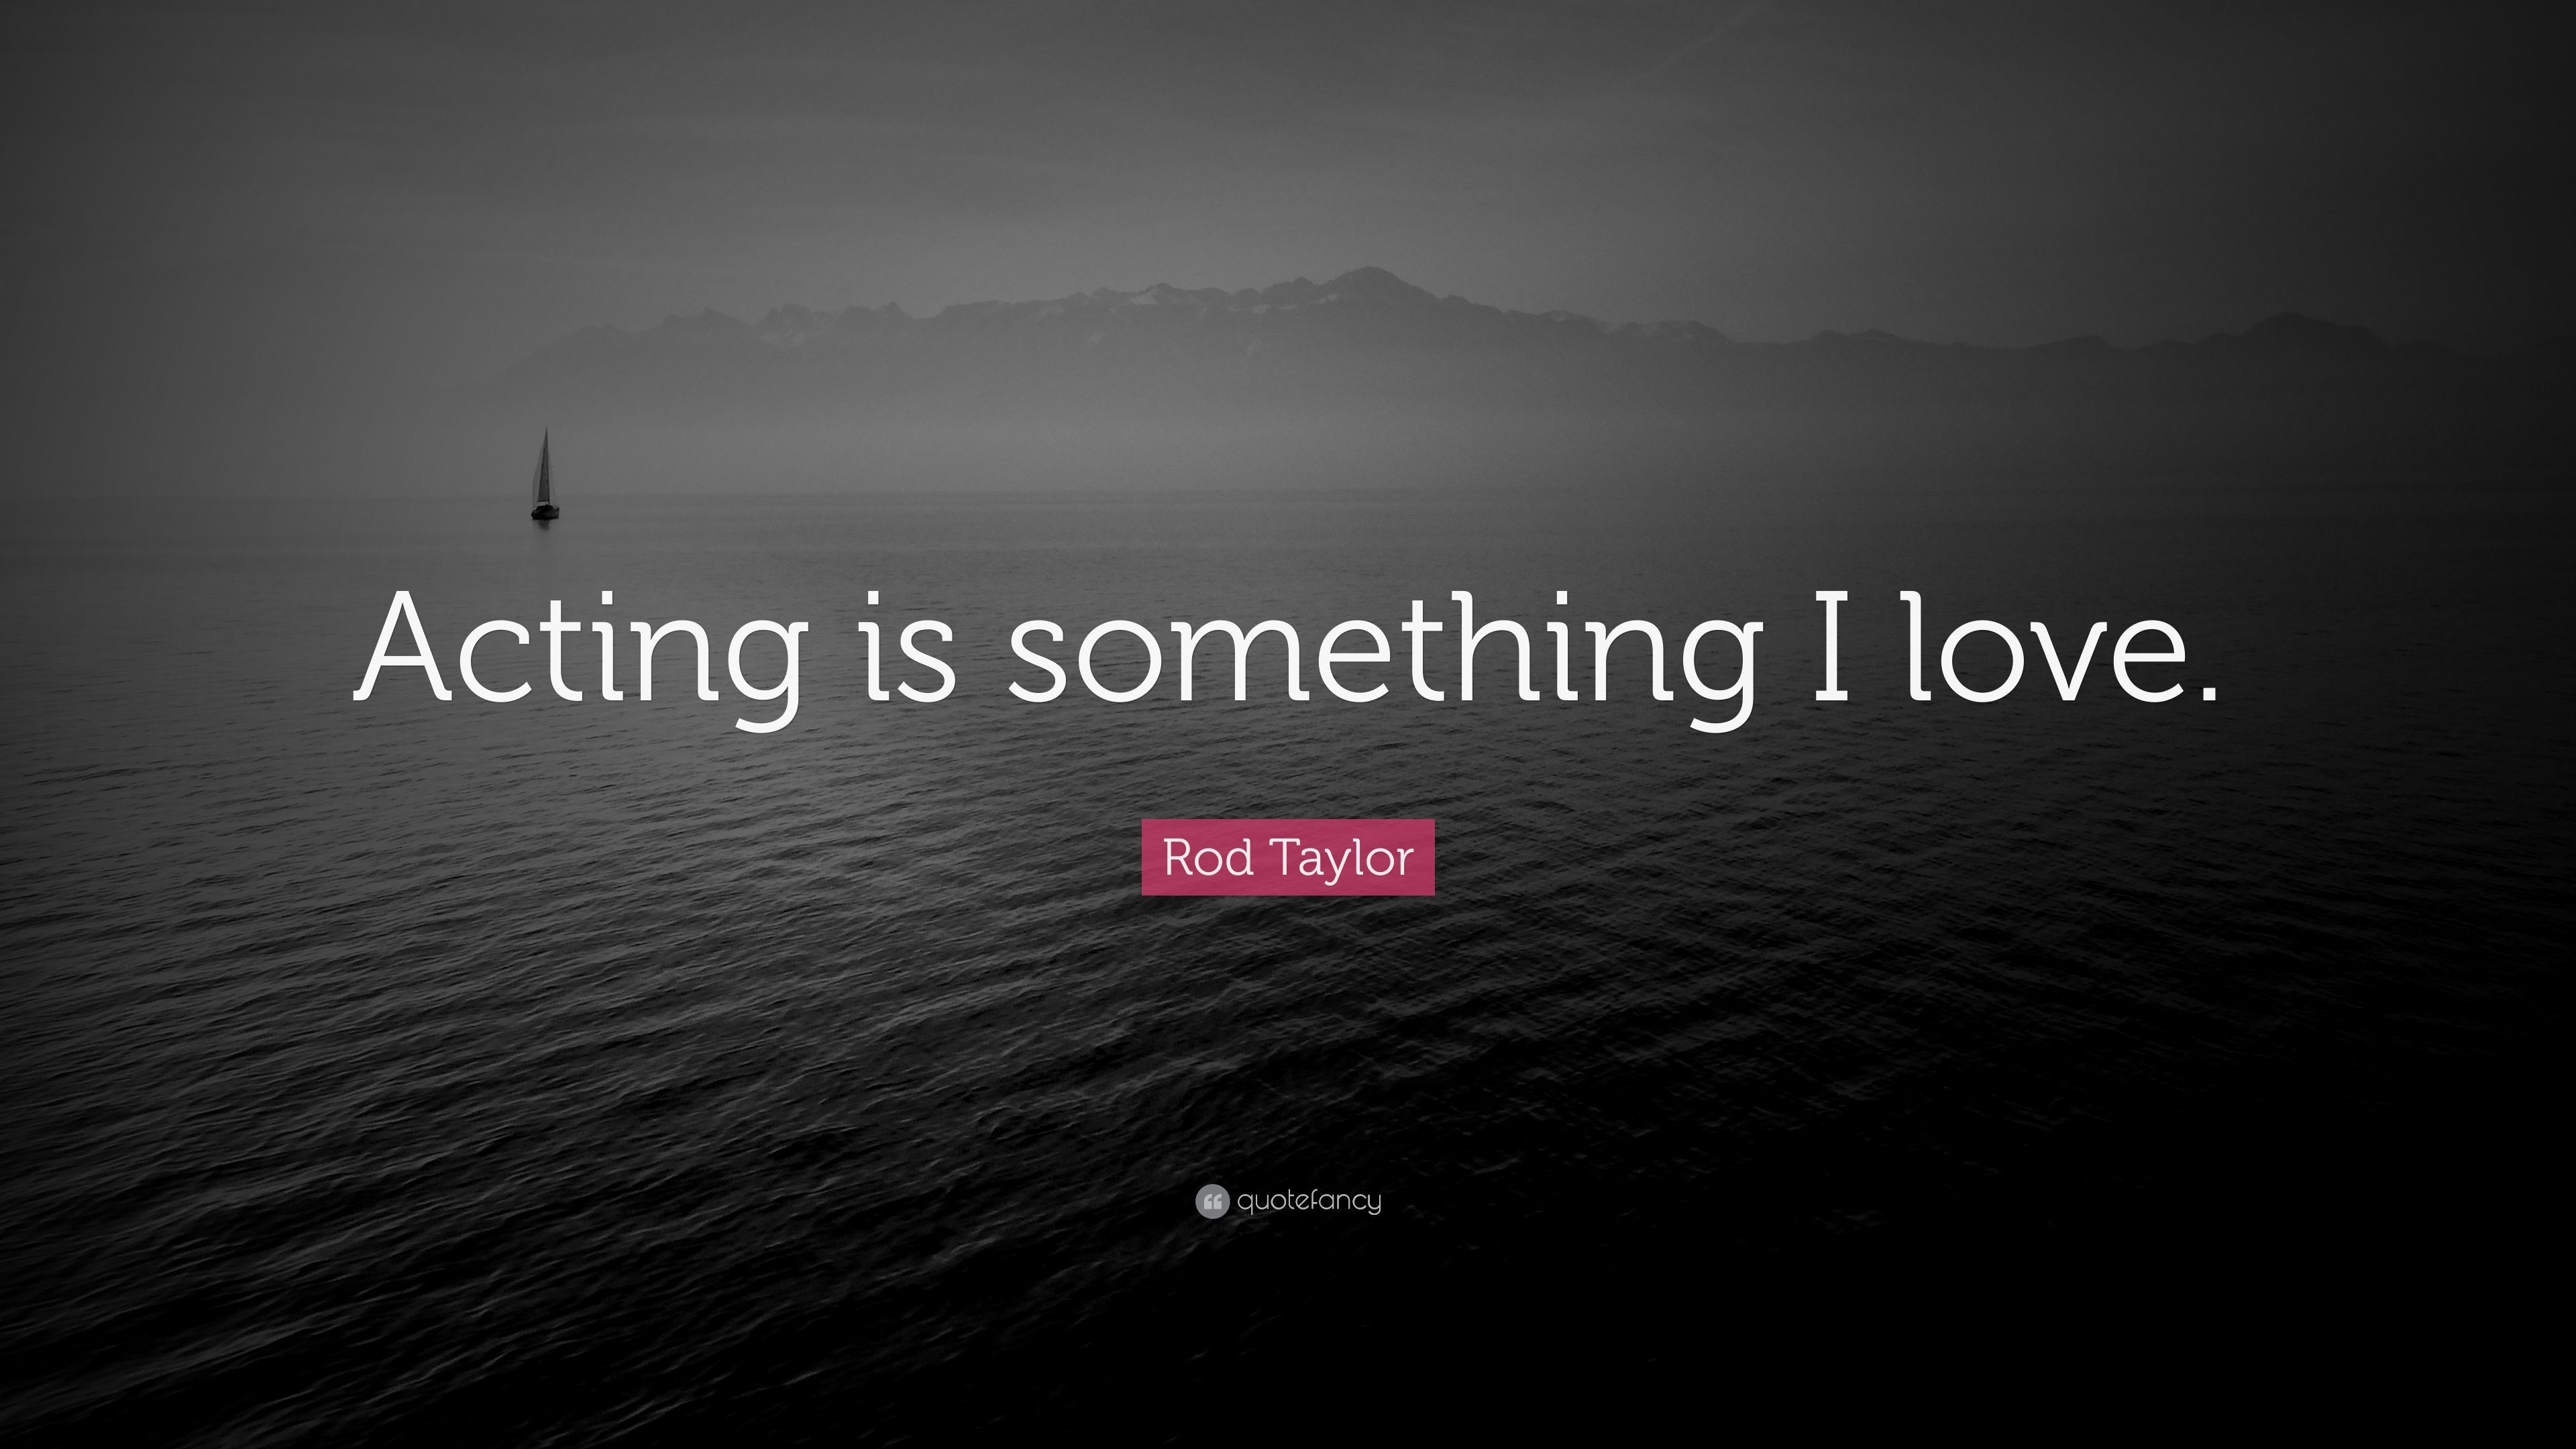 Rod Taylor Quote: “Acting is something I love.” 7 wallpaper